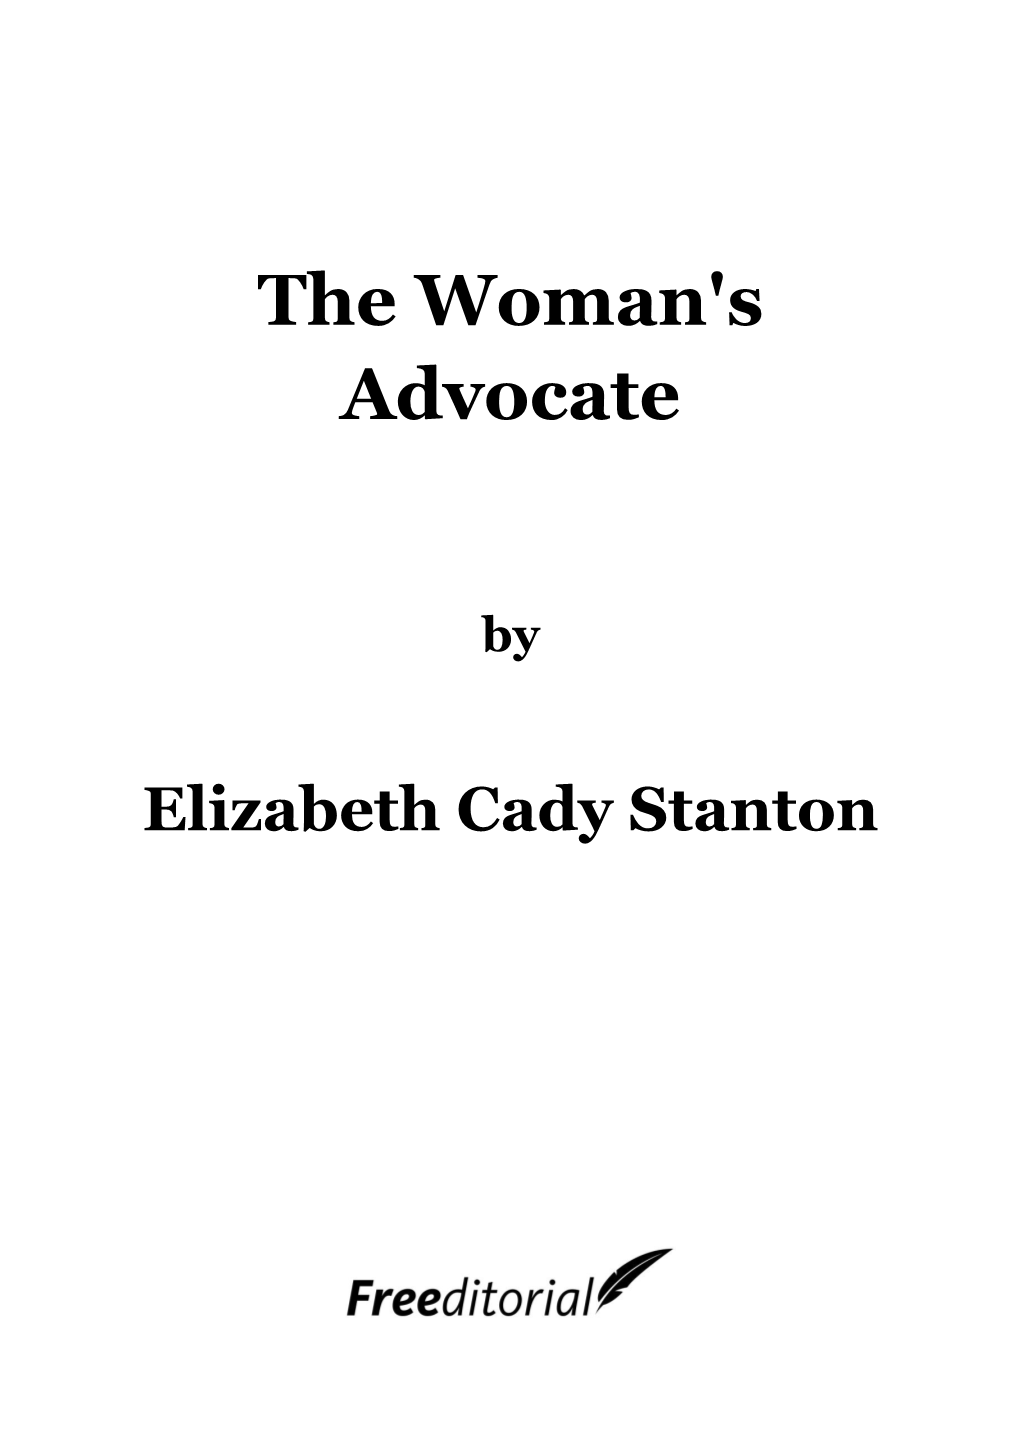 The Woman's Advocate